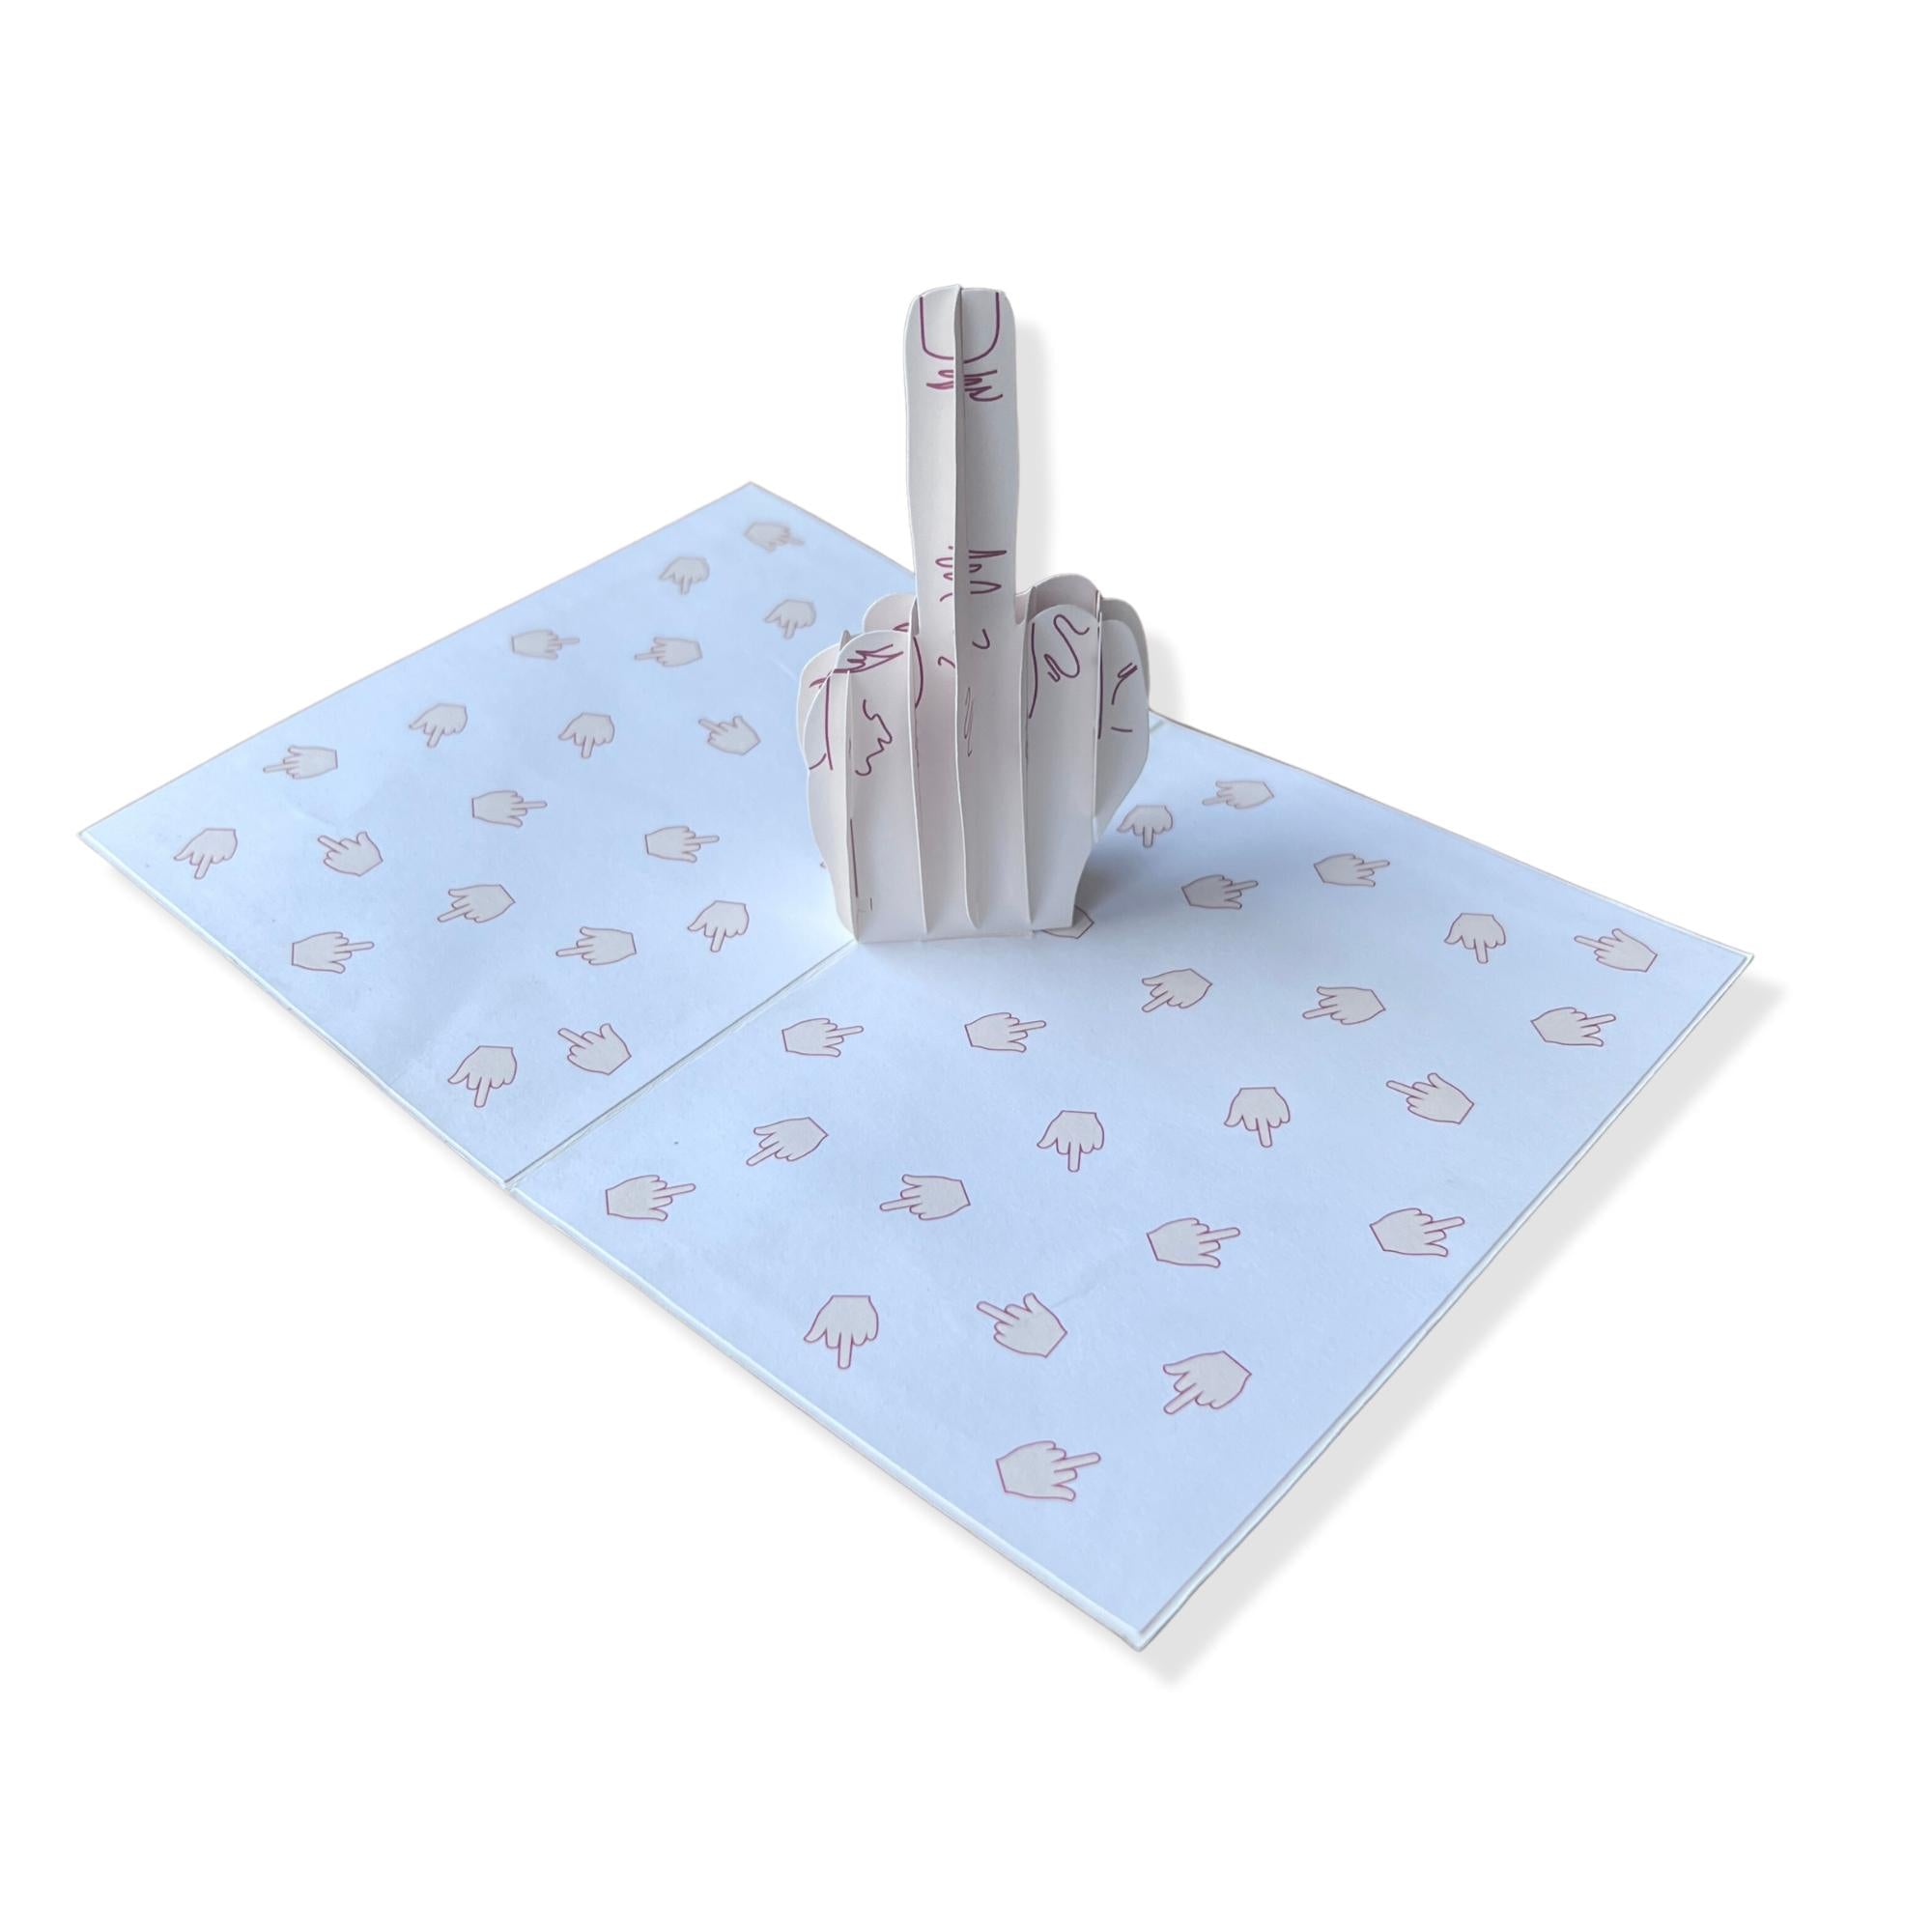 Hey There - Pop up Middle Finger Card